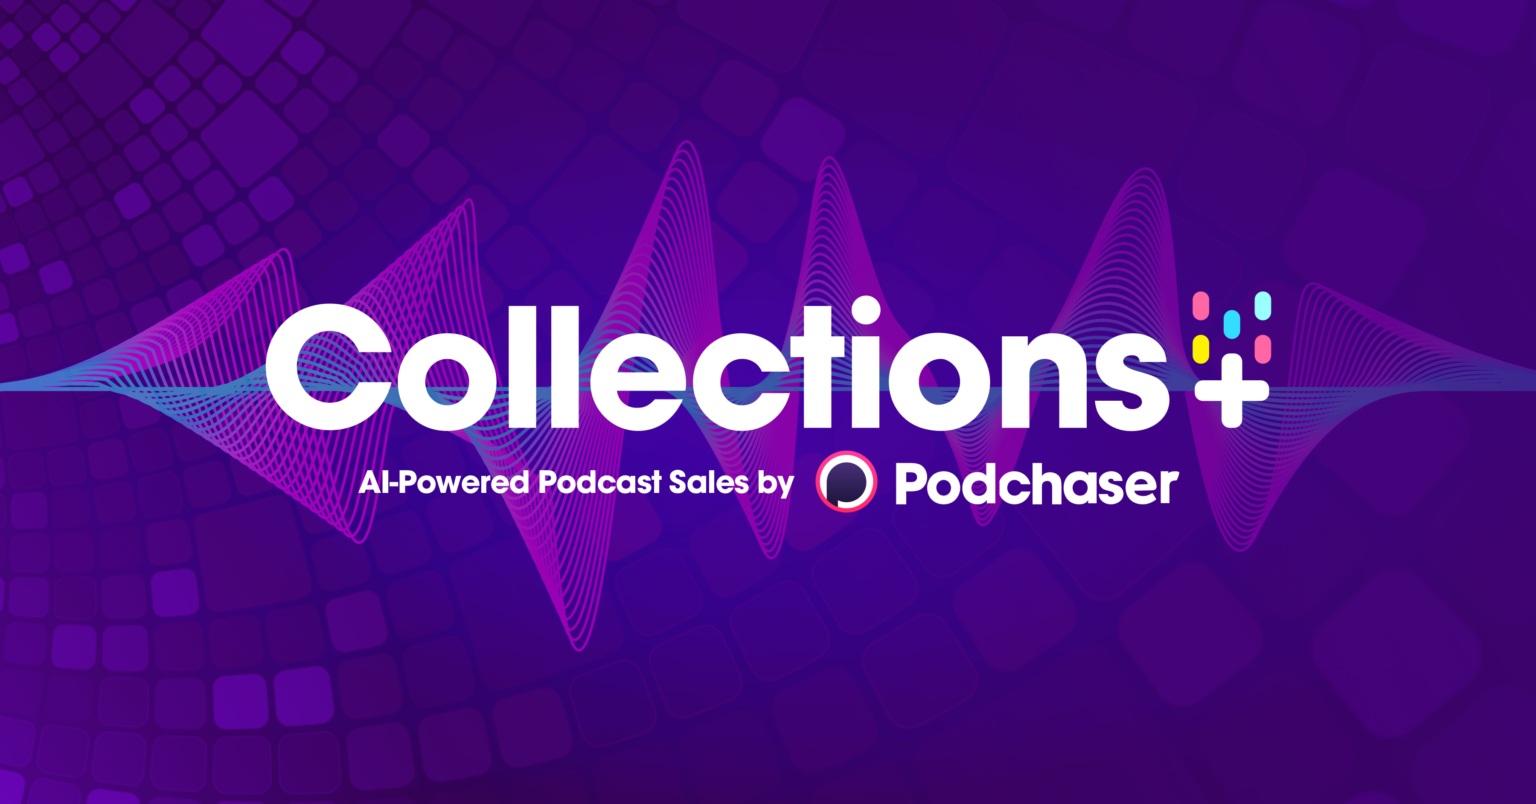 Podchaser Develops AI-Powered Data Capabilities with Launch of Collections+ to Advance Podcast Advertising For All